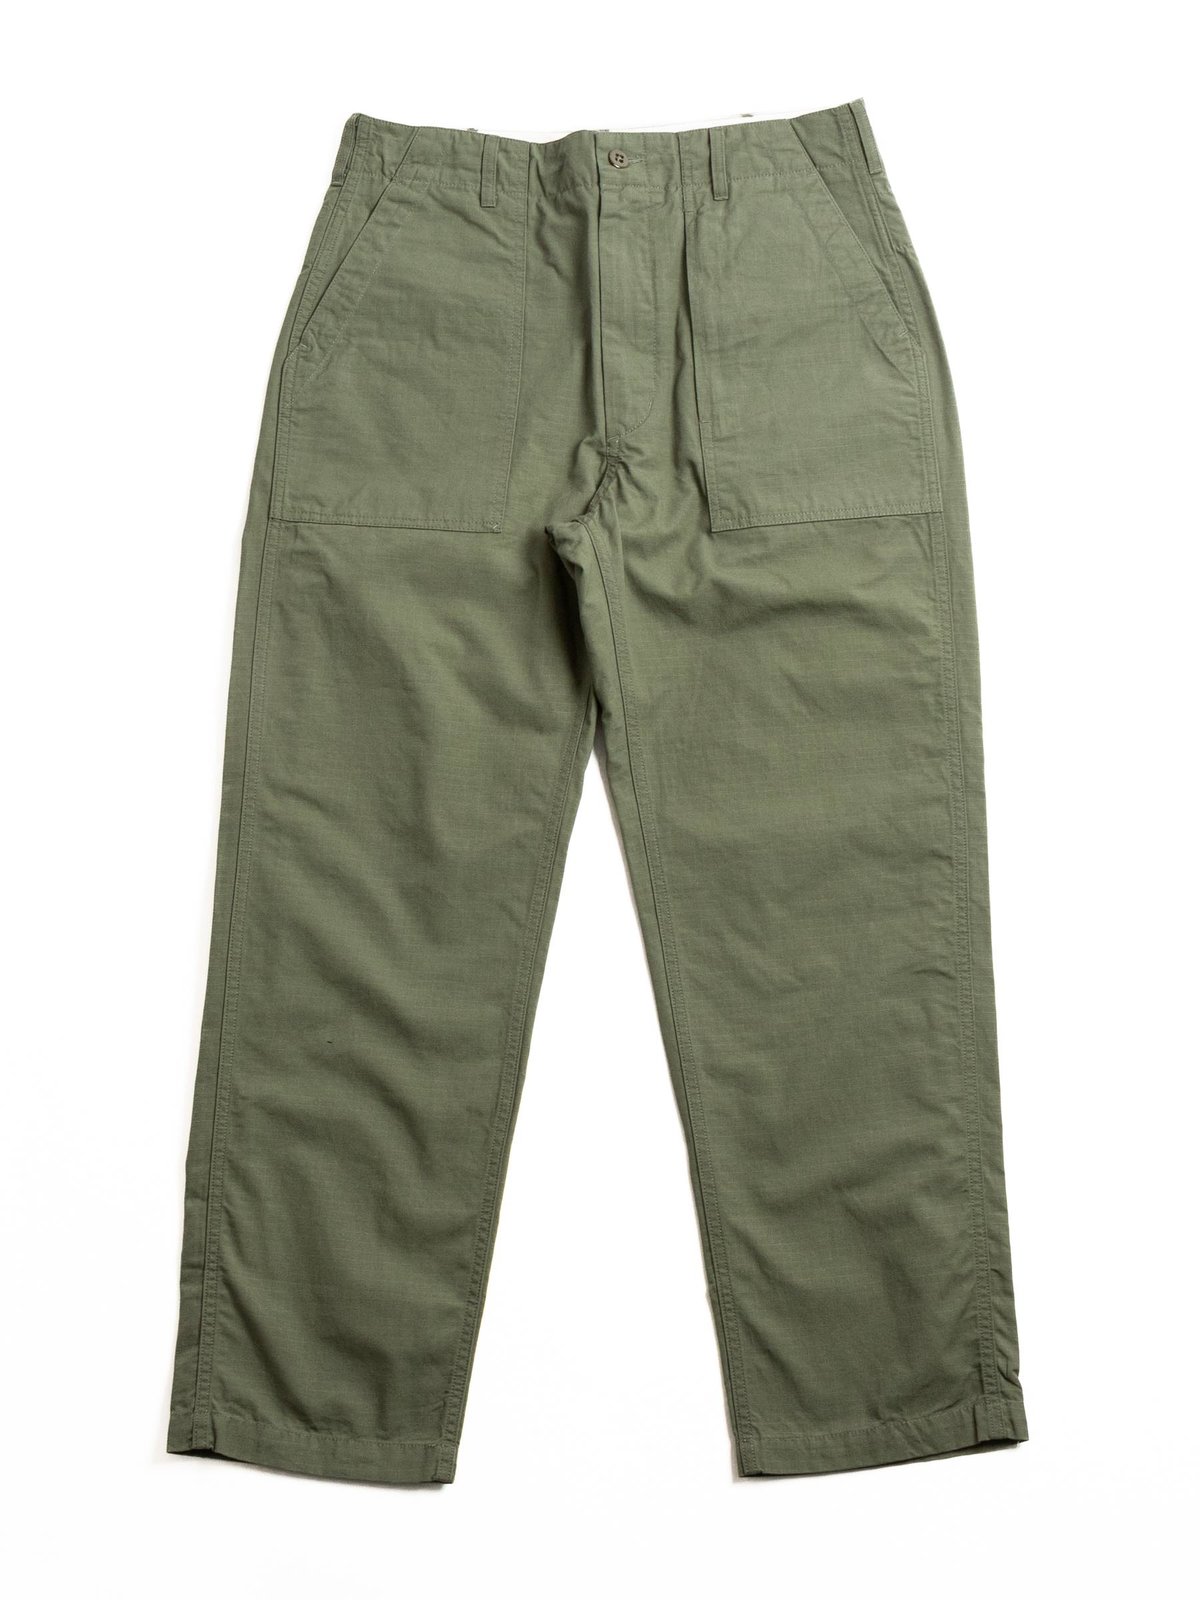 FATIGUE PANT OLIVE COTTON RIPSTOP - Image 1